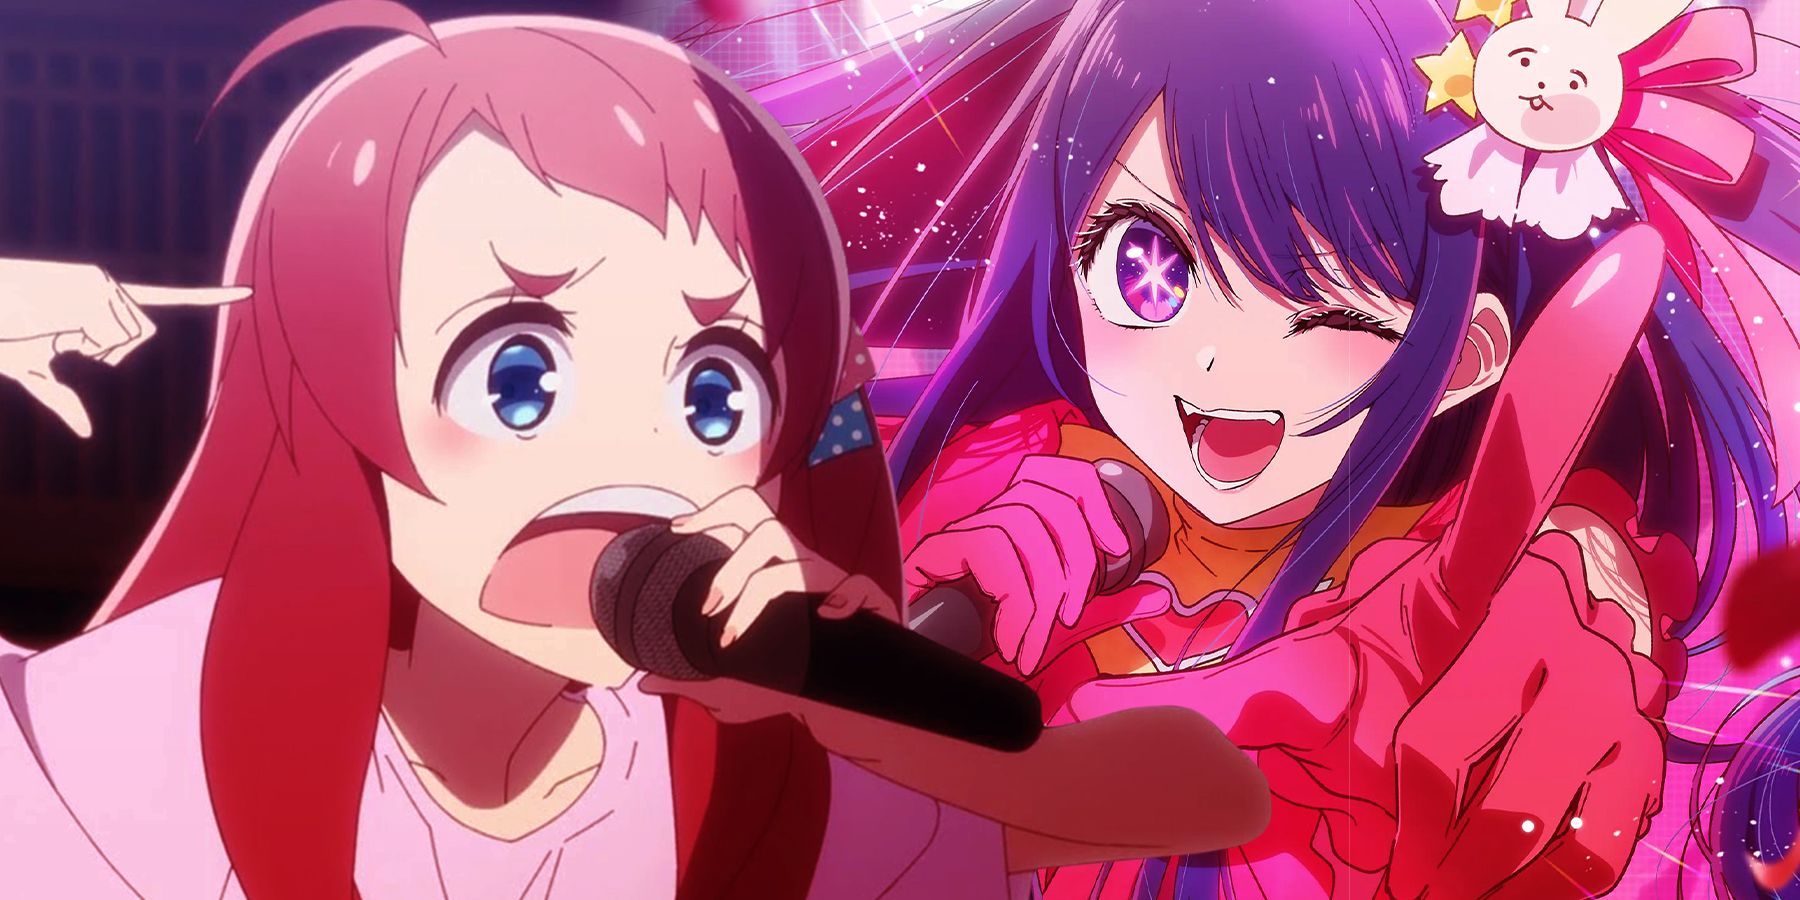 Sakura Minamoto of 'Zombie Land Saga' sings into a microphone intensely while making hand gestures. Ai Hoshino of 'Oshi No Koi' sings intro a microphone and winks.